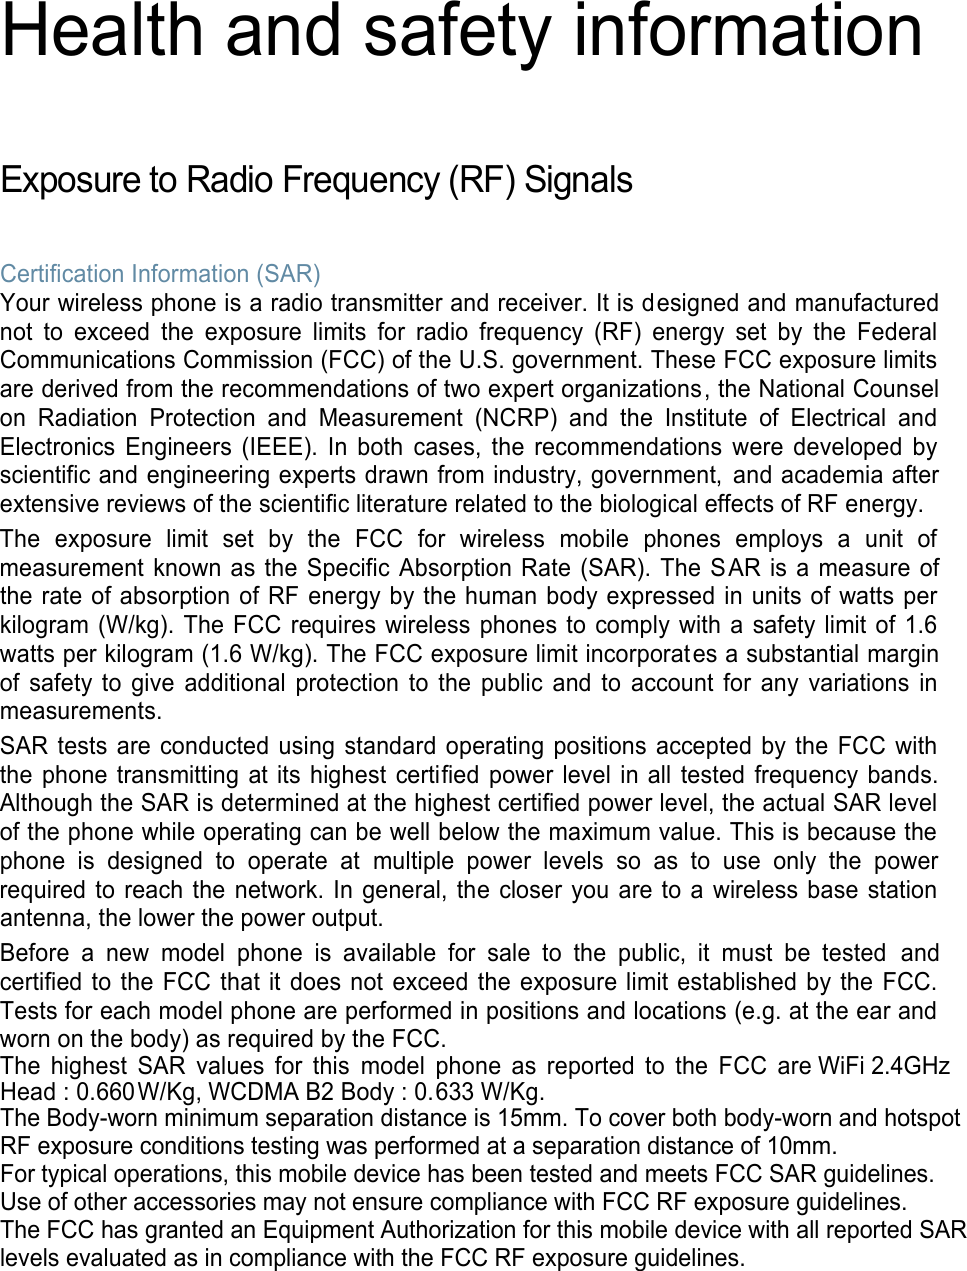  Health and safety information  Exposure to Radio Frequency (RF) Signals  Certification Information (SAR) Your wireless phone is a radio transmitter and receiver. It is designed and manufactured not  to  exceed  the  exposure  limits  for  radio  frequency  (RF)  energy  set  by  the  Federal Communications Commission (FCC) of the U.S. government. These FCC exposure limits are derived from the recommendations of two expert organizations, the National Counsel on  Radiation  Protection  and  Measurement  (NCRP)  and  the  Institute  of  Electrical  and Electronics  Engineers  (IEEE).  In  both  cases,  the  recommendations  were  developed  by scientific and engineering experts drawn from industry, government, and academia after extensive reviews of the scientific literature related to the biological effects of RF energy. The  exposure  limit  set  by  the  FCC  for  wireless  mobile  phones  employs  a  unit  of measurement known as the Specific Absorption  Rate (SAR). The SAR is  a measure  of the rate of absorption of RF energy by the human body expressed in units of watts per kilogram (W/kg). The FCC requires  wireless  phones to comply with  a safety limit  of 1.6 watts per kilogram (1.6 W/kg). The FCC exposure limit incorporates a substantial margin of  safety  to  give  additional  protection  to  the  public  and  to  account  for  any  variations  in measurements. SAR tests are  conducted using standard operating positions accepted by the FCC  with the phone transmitting at its highest certified power level in all tested  frequency bands. Although the SAR is determined at the highest certified power level, the actual SAR level of the phone while operating can be well below the maximum value. This is because the phone  is  designed  to  operate  at  multiple  power  levels  so  as  to  use  only  the  power required to reach the  network.  In  general, the  closer you are to a wireless base  station antenna, the lower the power output. Before  a  new  model  phone  is  available  for  sale  to  the  public,  it  must  be  tested  and certified to the FCC  that it does  not  exceed the exposure limit established by the  FCC. Tests for each model phone are performed in positions and locations (e.g. at the ear and worn on the body) as required by the FCC.   The  highest  SAR  values  for  this  model  phone  as  reported  to  the  FCC  are WiFi 2.4GHz   Head : 0.660   W/Kg, WCDMA B2 Body : 0.633 W/Kg. The Body-worn minimum separation distance is 15mm. To cover both body-worn and hotspot RF exposure conditions testing was performed at a separation distance of 10mm.For typical operations, this mobile device has been tested and meets FCC SAR guidelines.Use of other accessories may not ensure compliance with FCC RF exposure guidelines.The FCC has granted an Equipment Authorization for this mobile device with all reported SAR levels evaluated as in compliance with the FCC RF exposure guidelines.